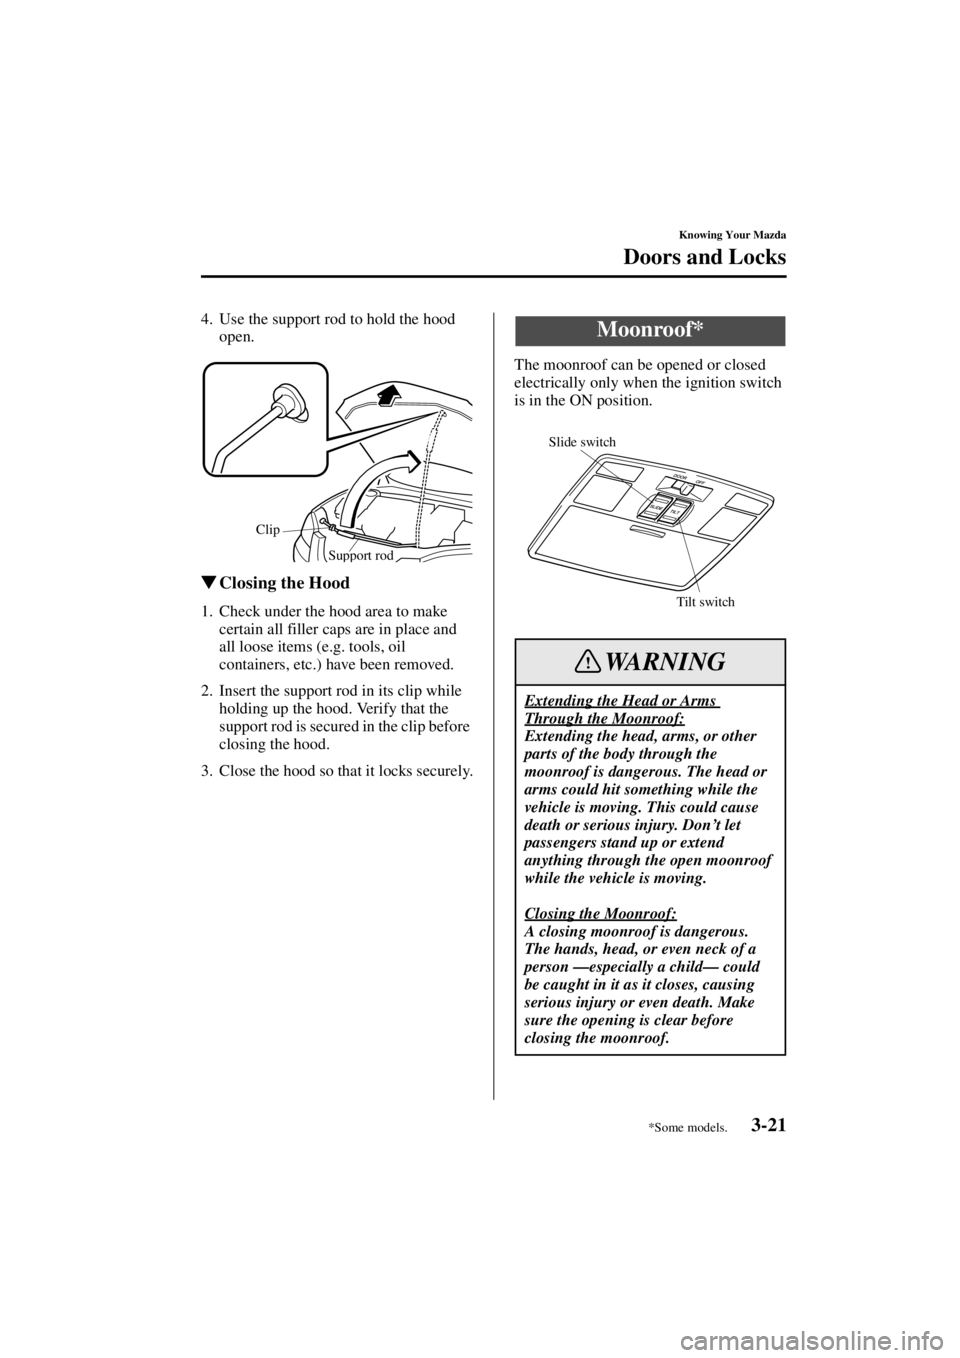 MAZDA MODEL 3 4-DOOR 2004 Service Manual 3-21
Knowing Your Mazda
Doors and Locks
Form No. 8S18-EA-03I
4. Use the support rod to hold the hood open.
Closing the Hood
1. Check under the hood area to make 
certain all filler caps are in place 